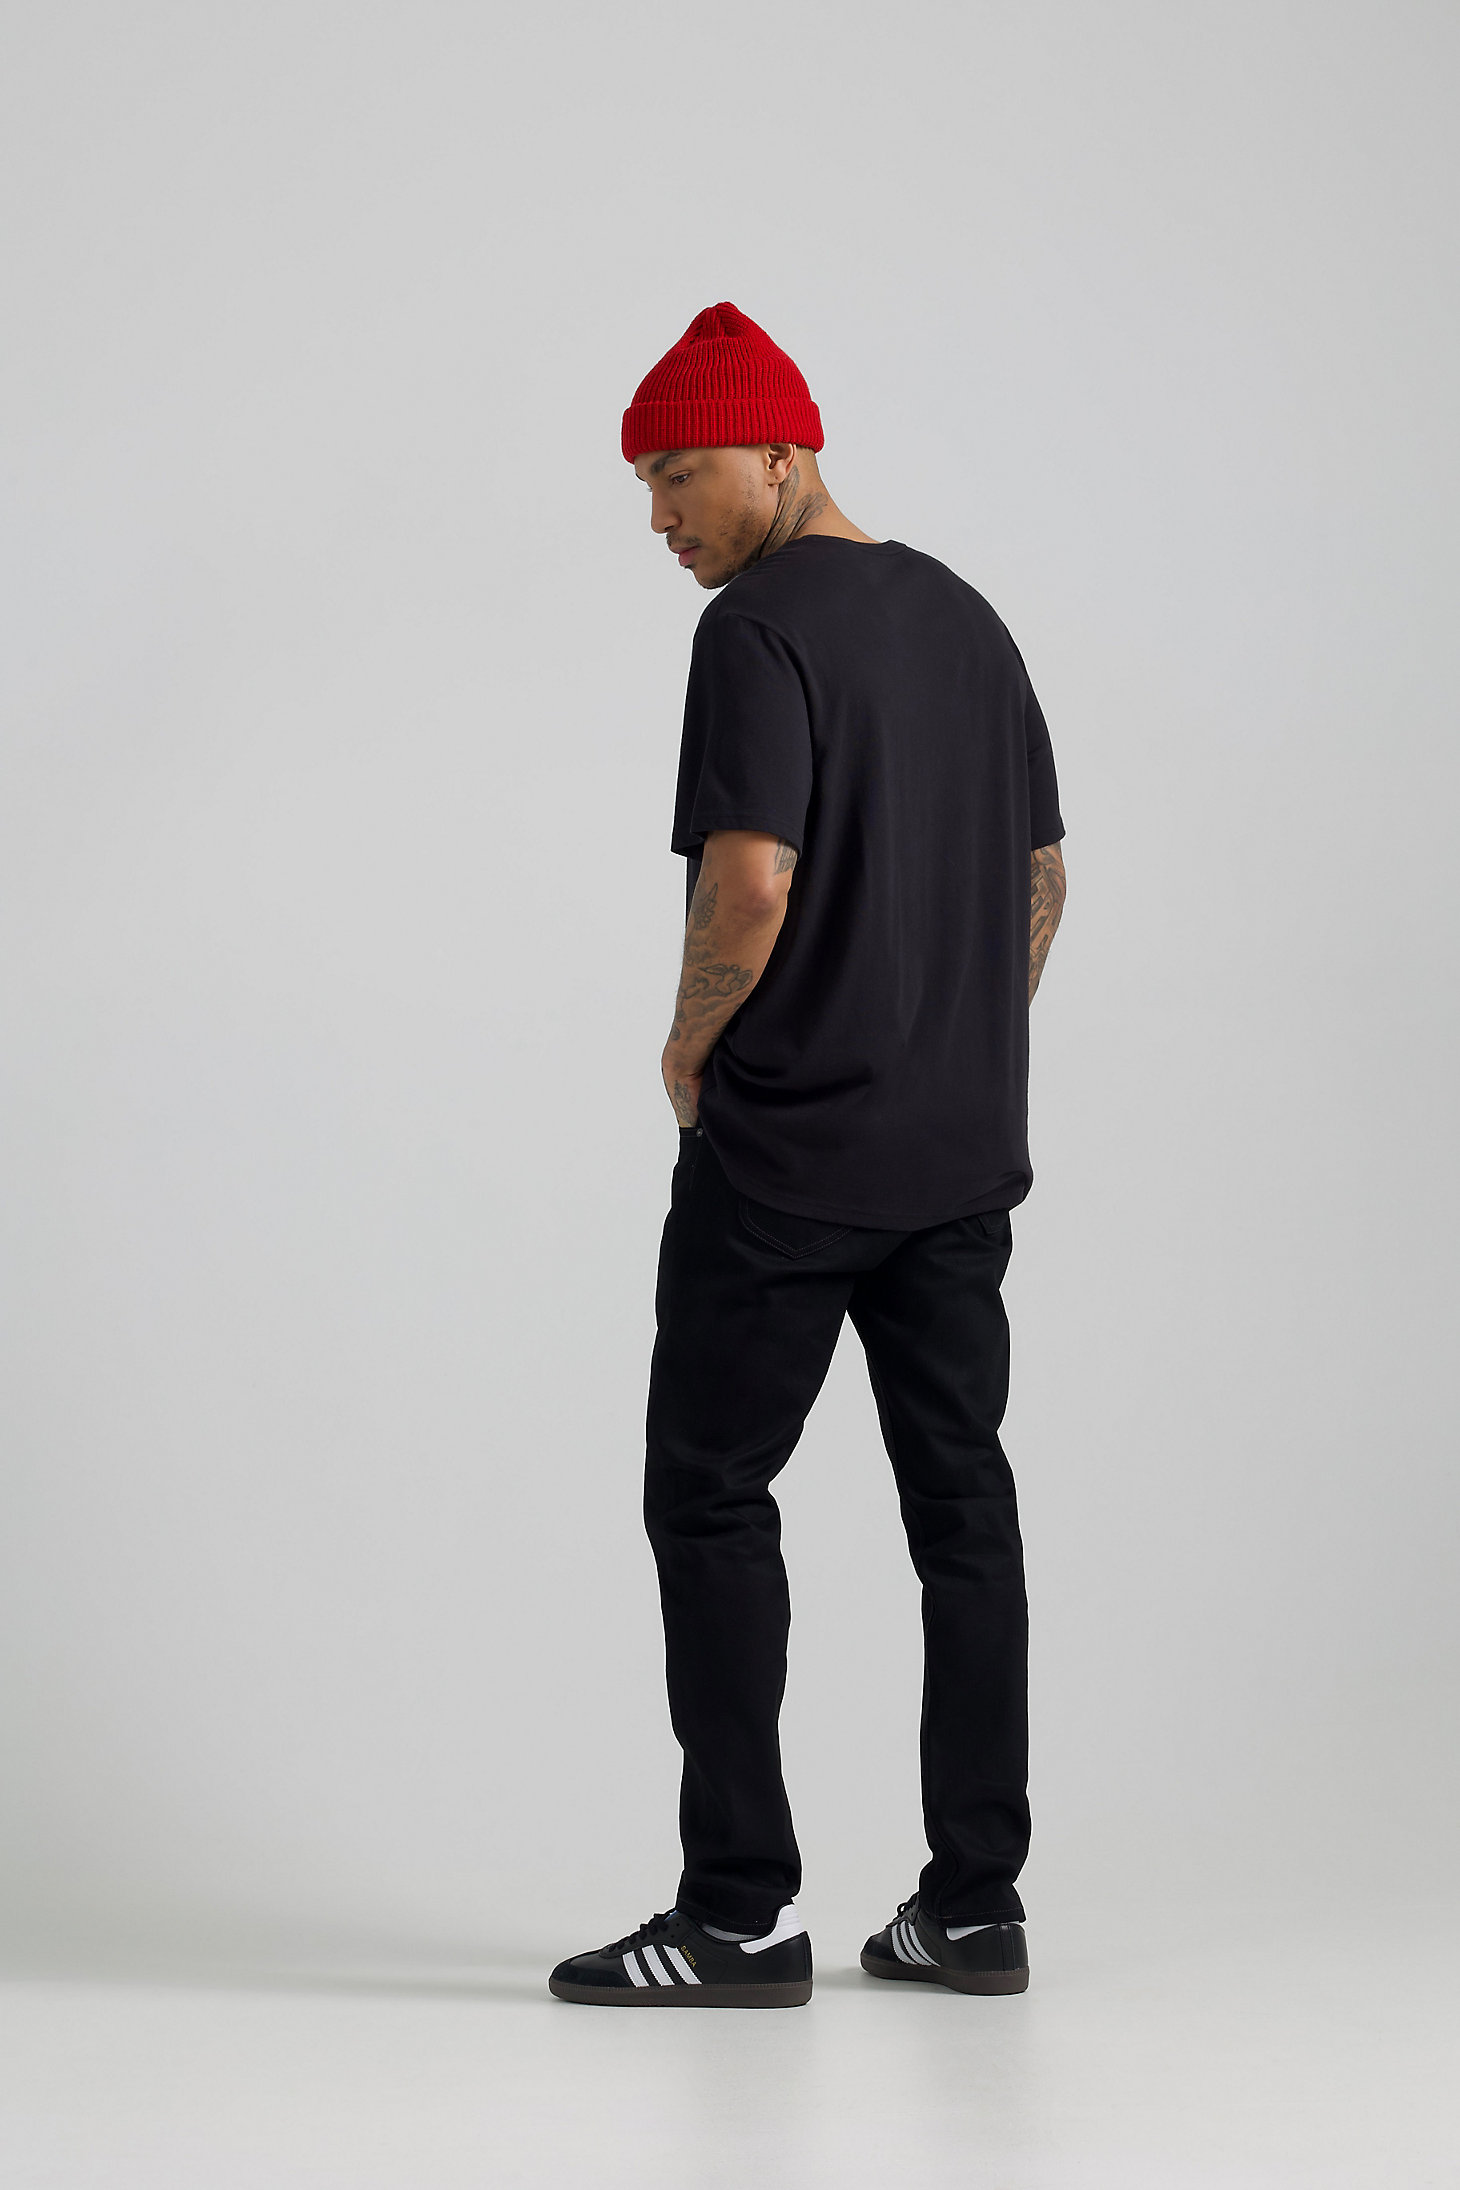 Men's Lee x BE@RBRICK Buddy Lee Relaxed Fit Tee in Washed Black alternative view 3